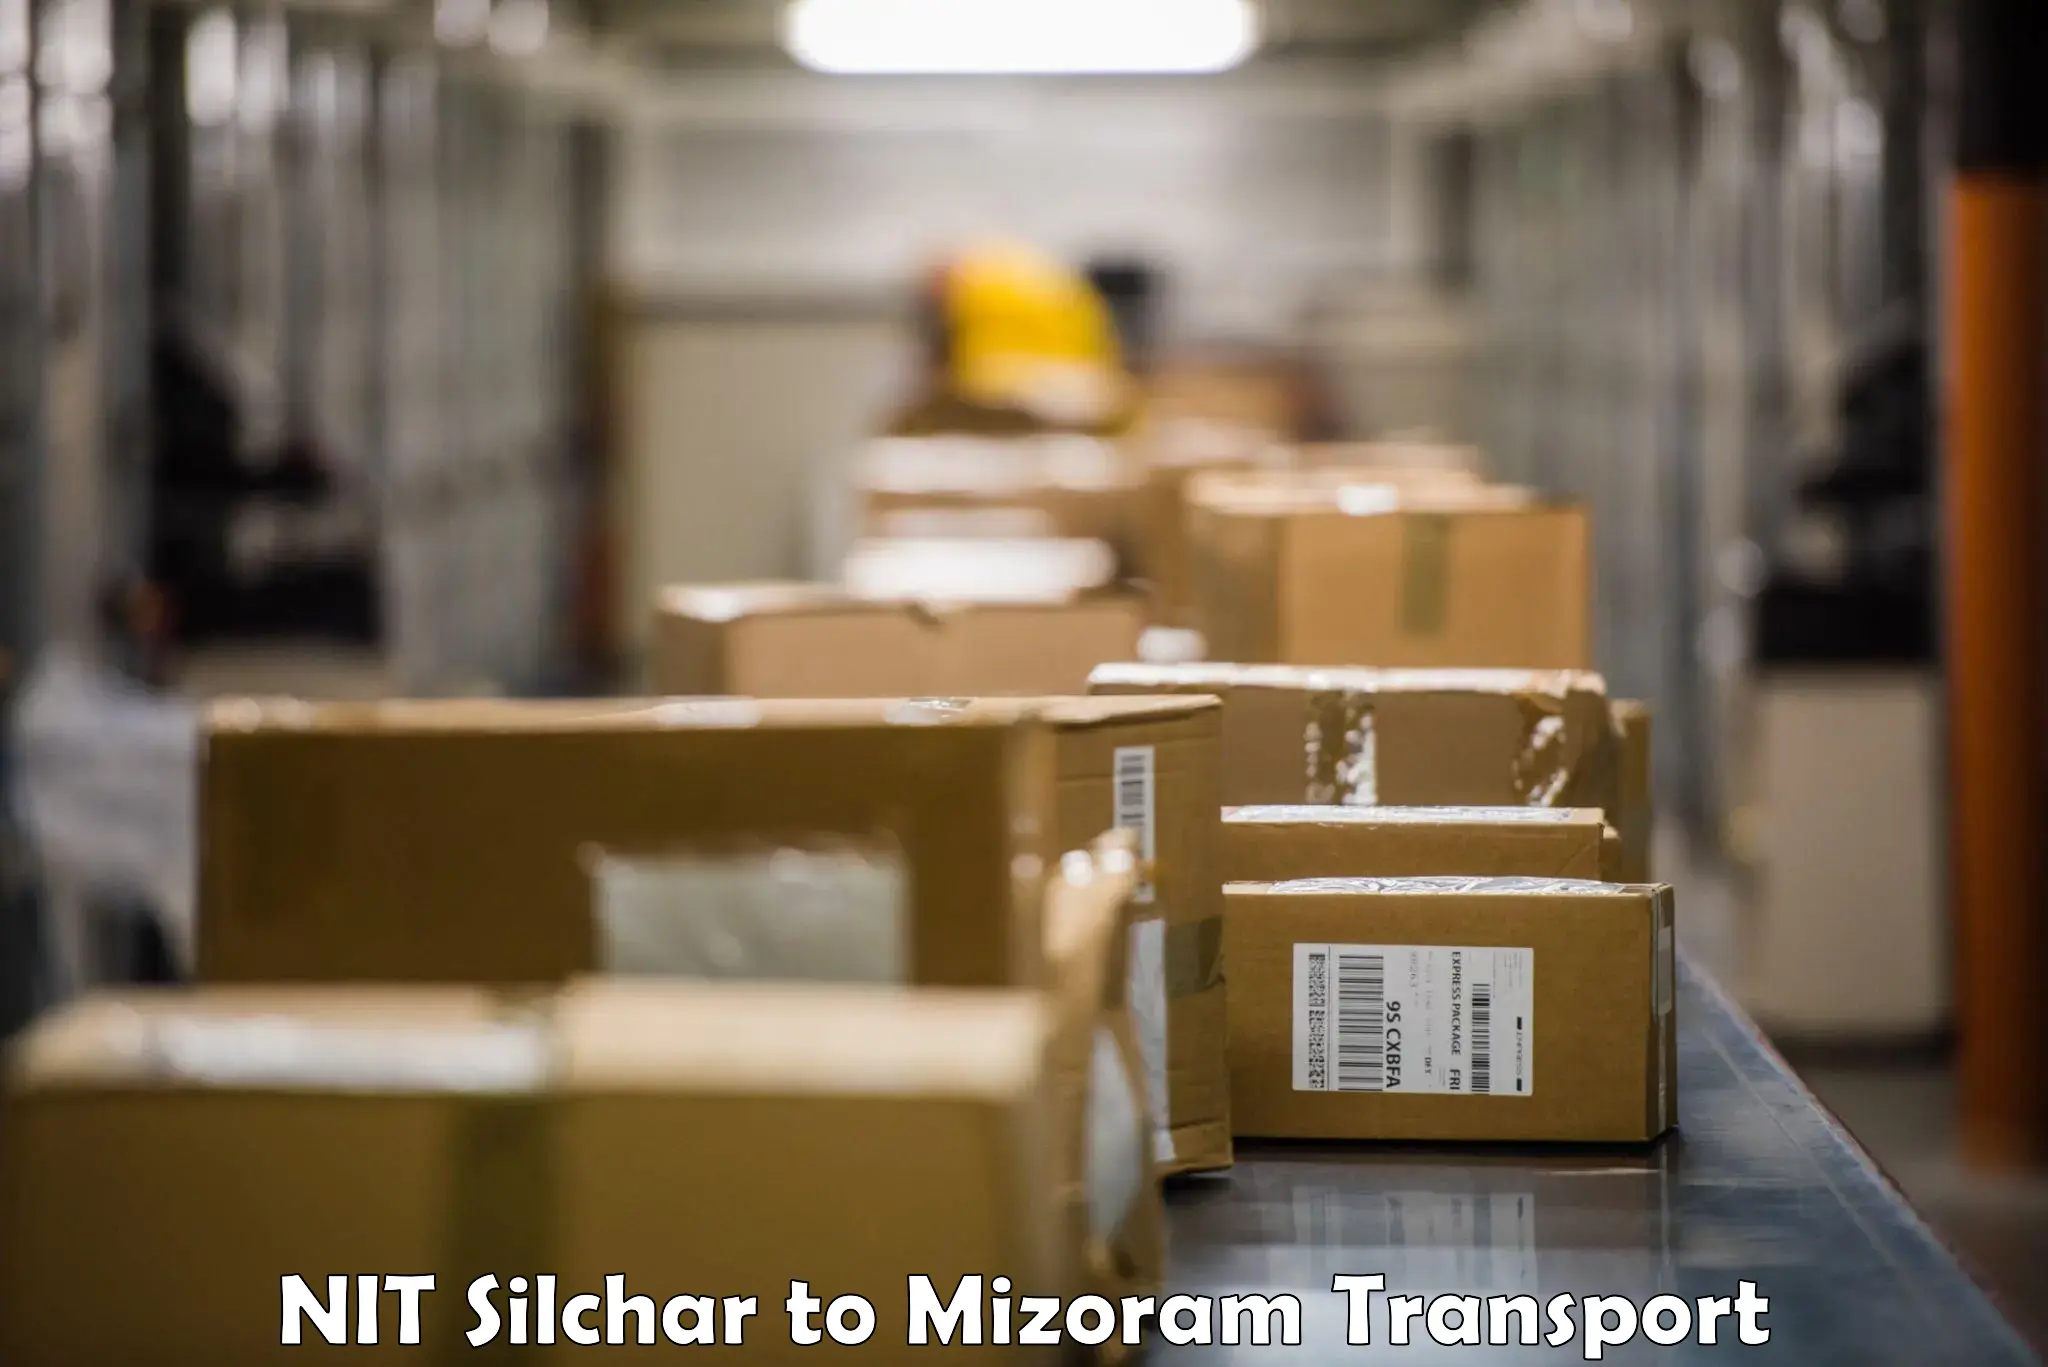 Cargo transportation services NIT Silchar to Siaha